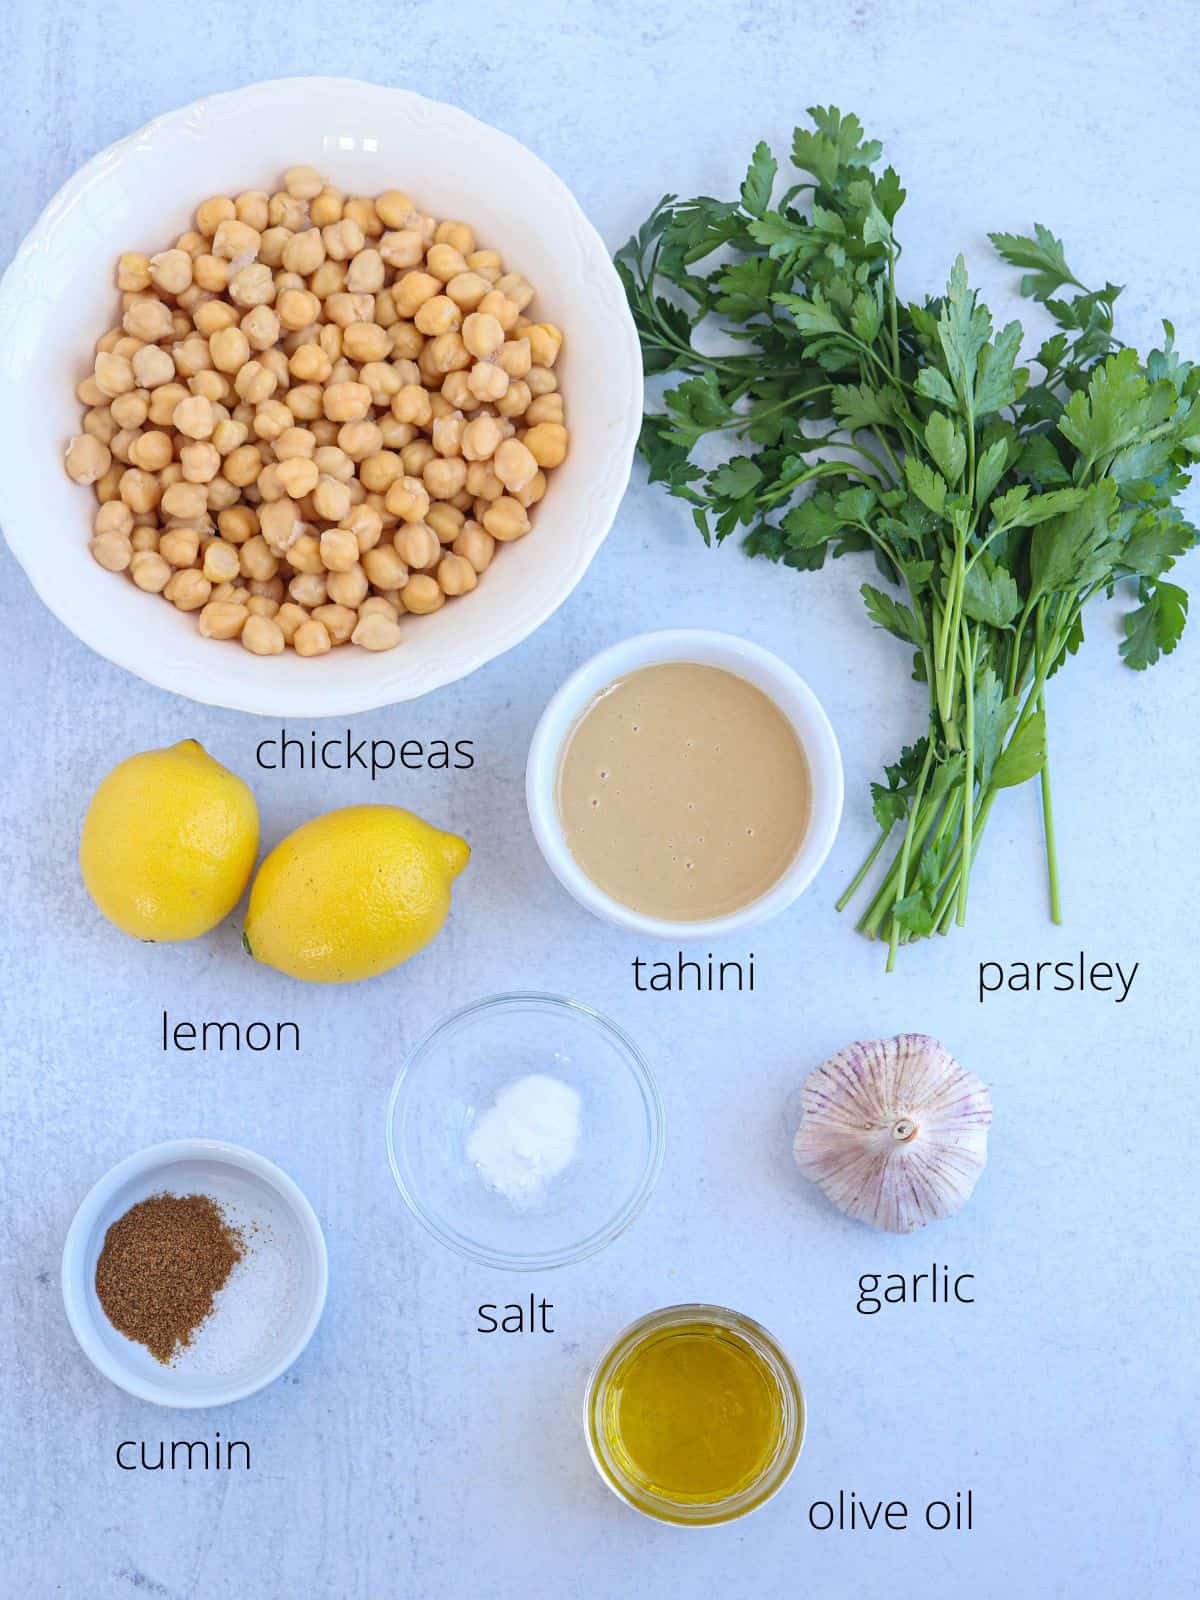 whole chickpea hummus ingredients laid out in bowls on light gray surface with captions.